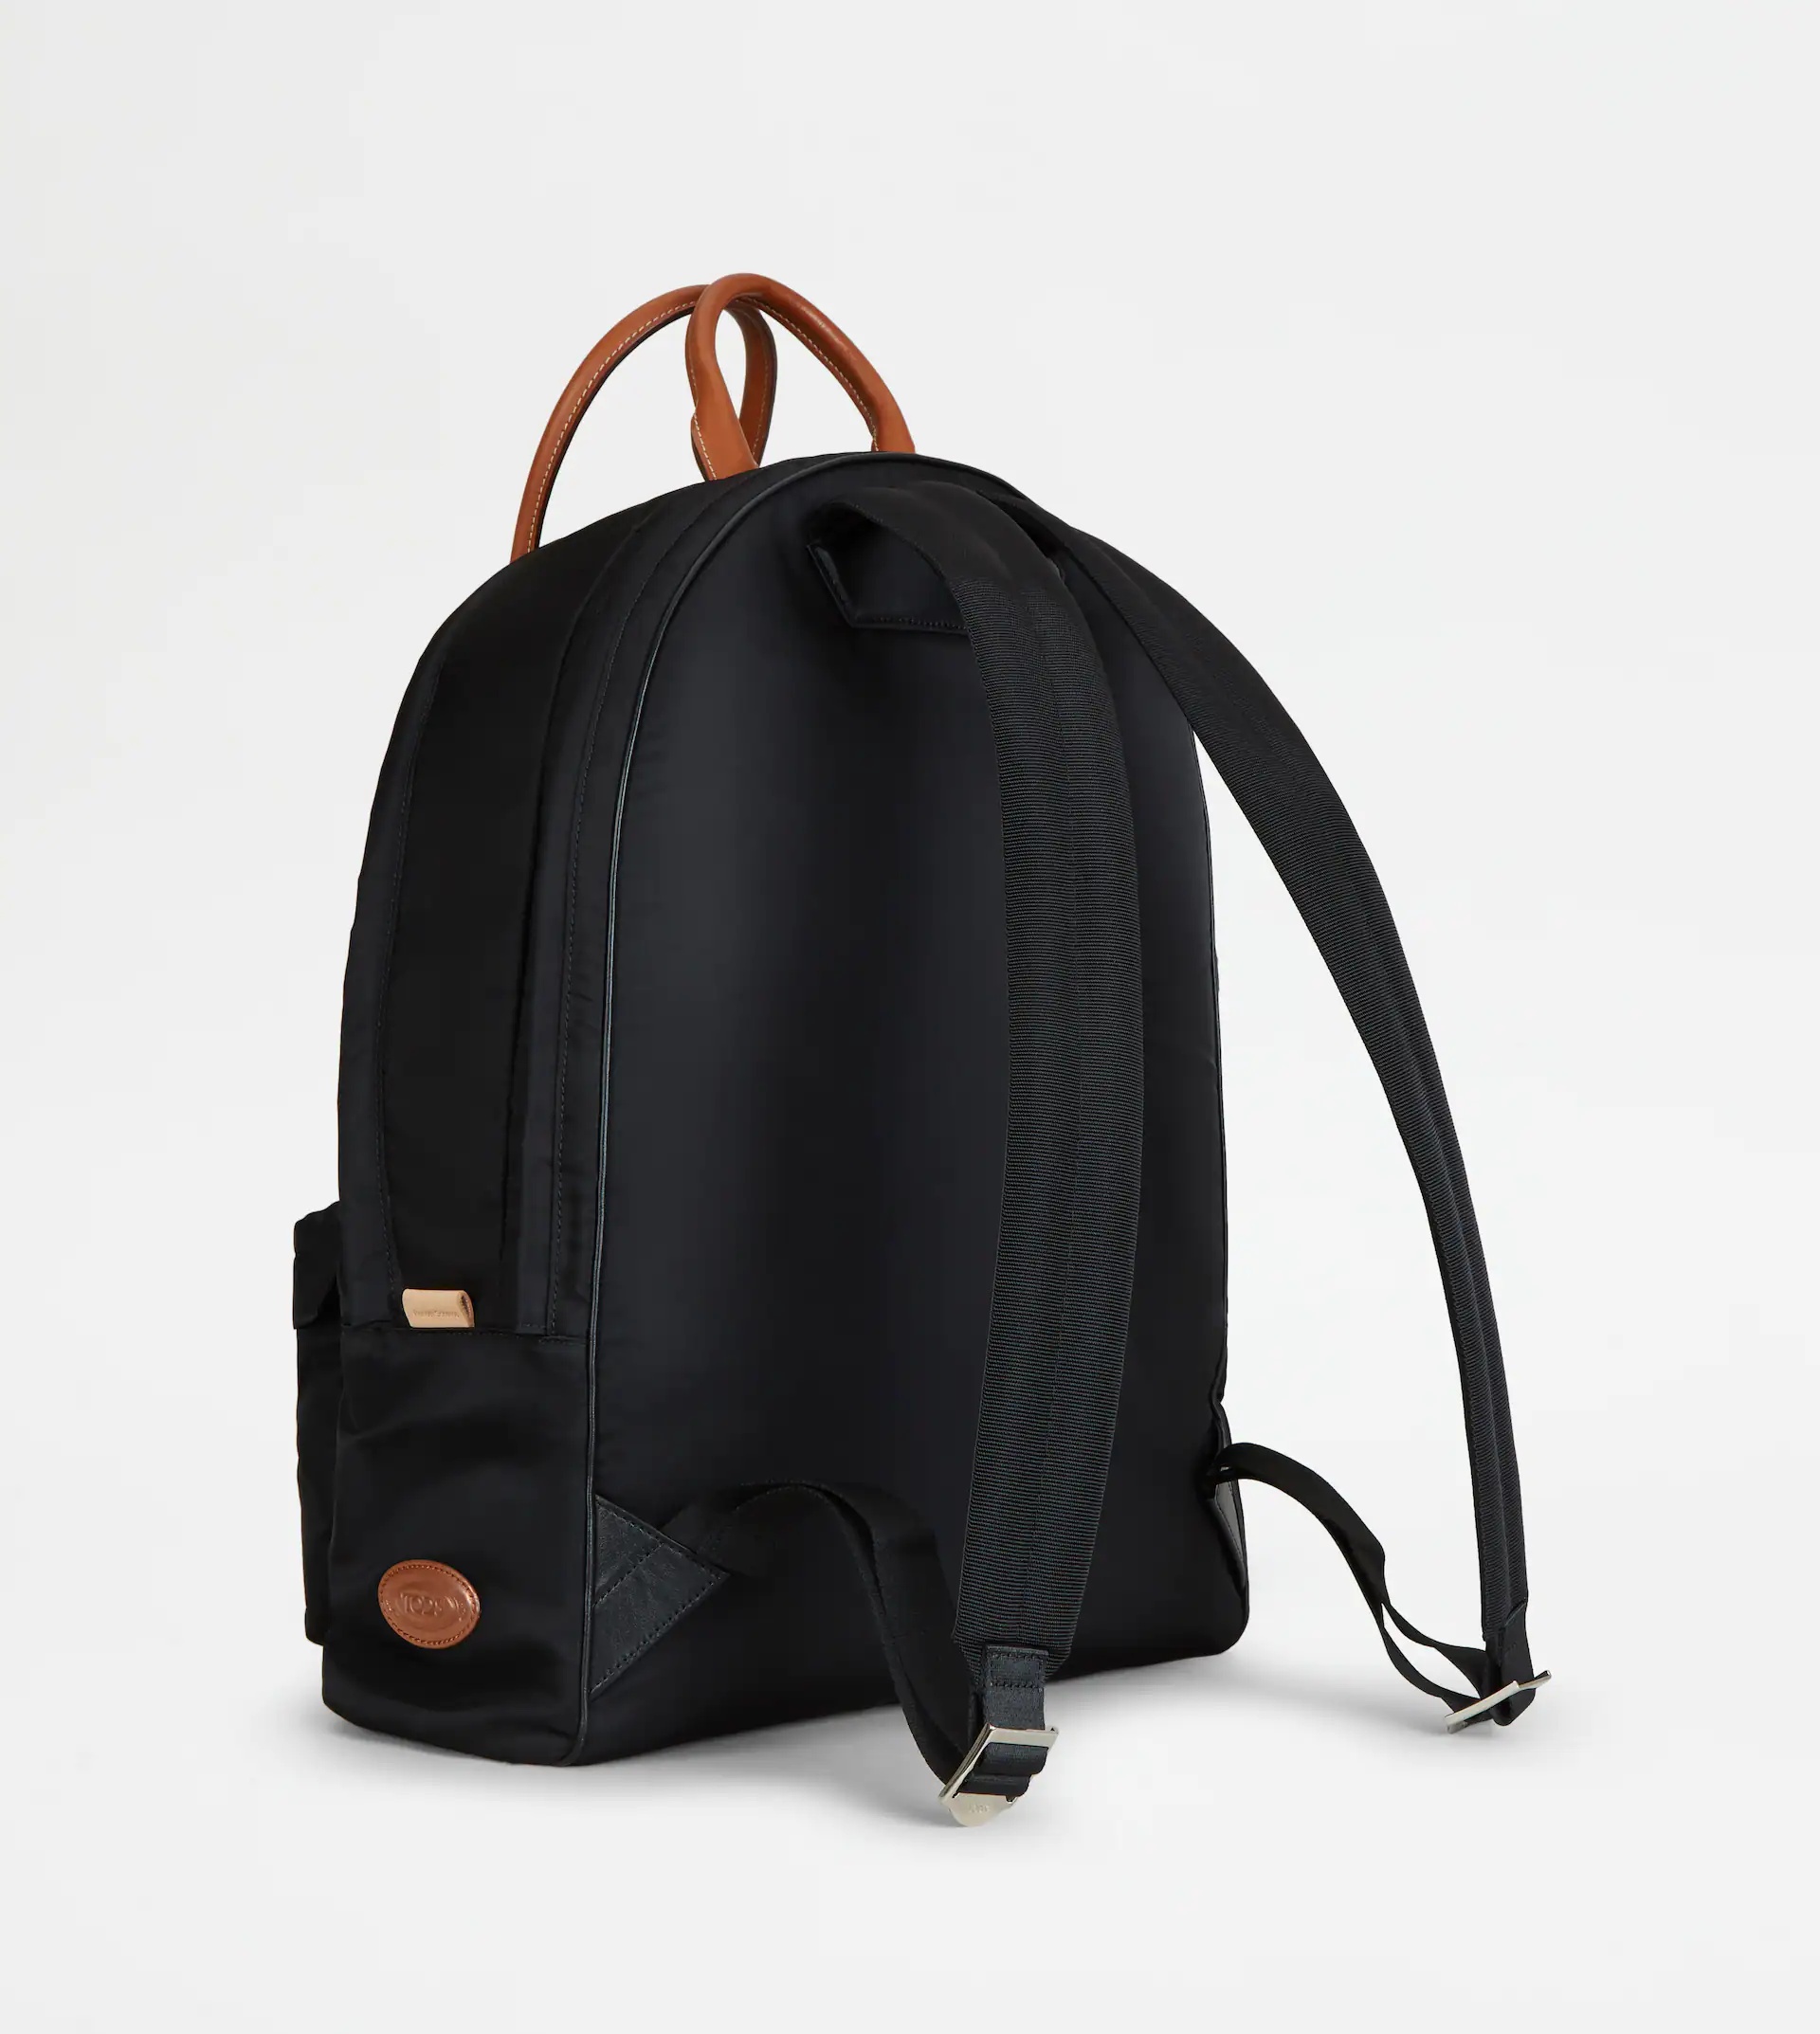 BACKPACK IN FABRIC AND LEATHER MEDIUM - BLACK - 3